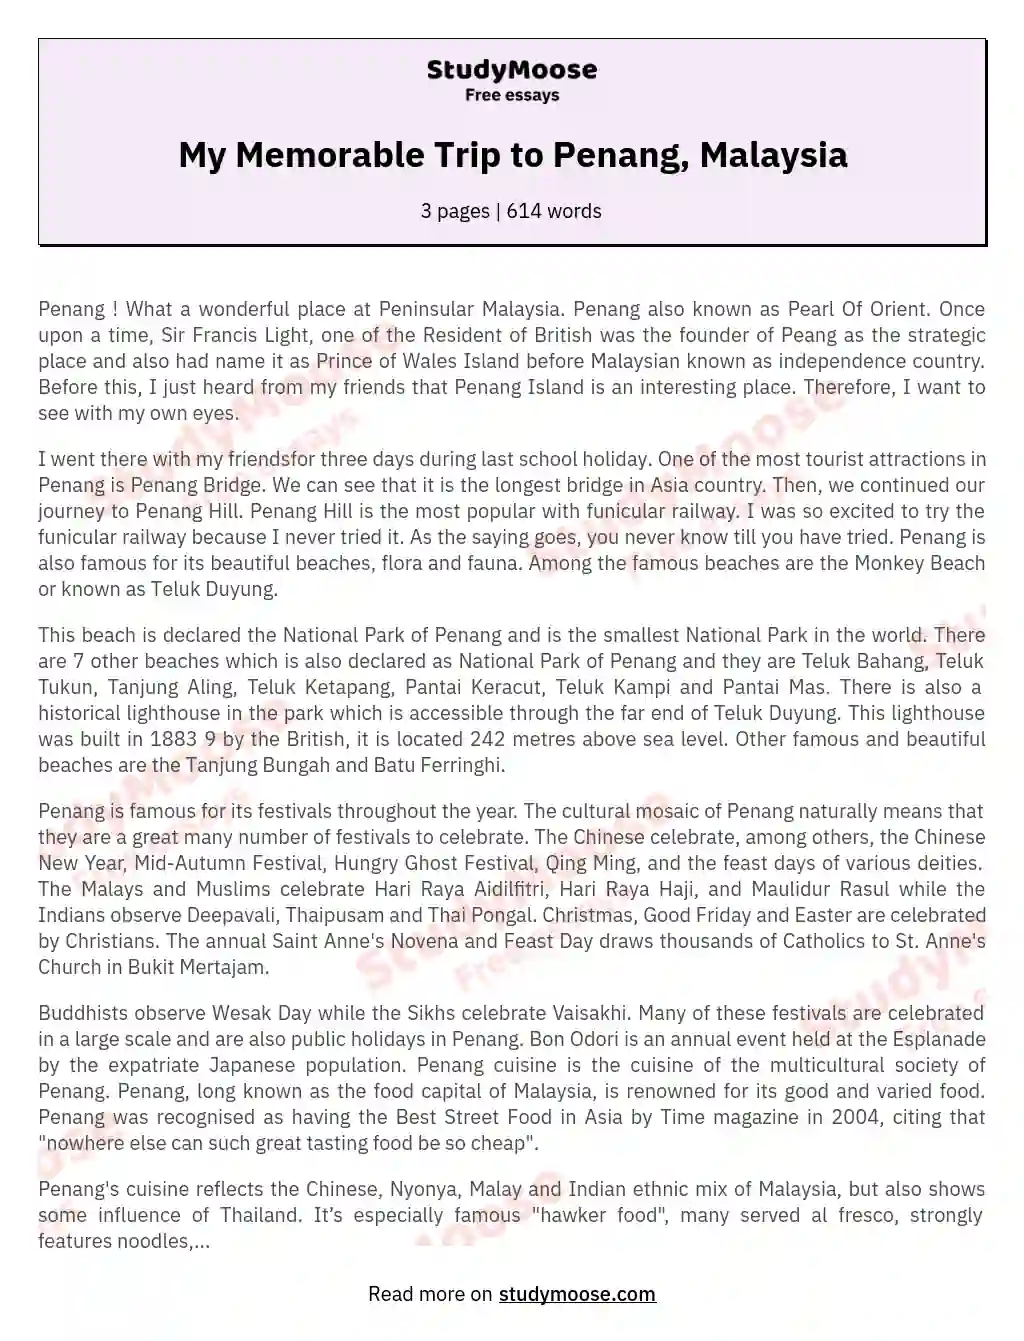 essay about going on a holiday in malaysia